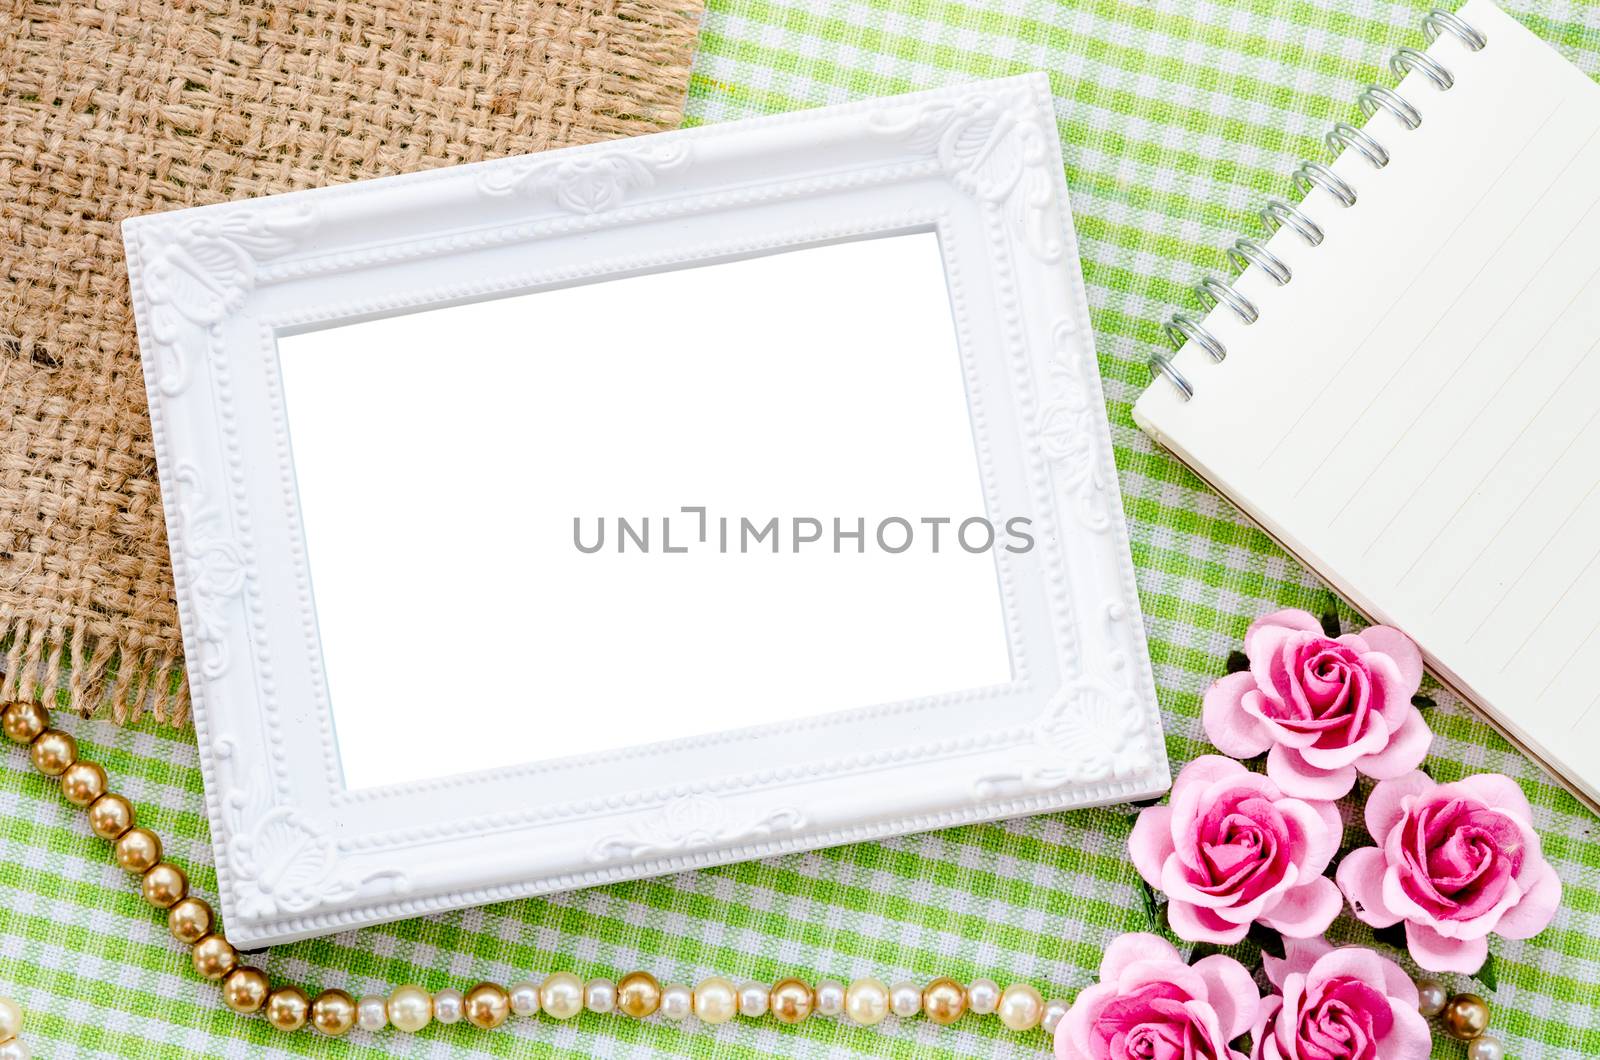 Blank vintage white photo frame and open diary with pink rose on fabric background. Save clipping path.